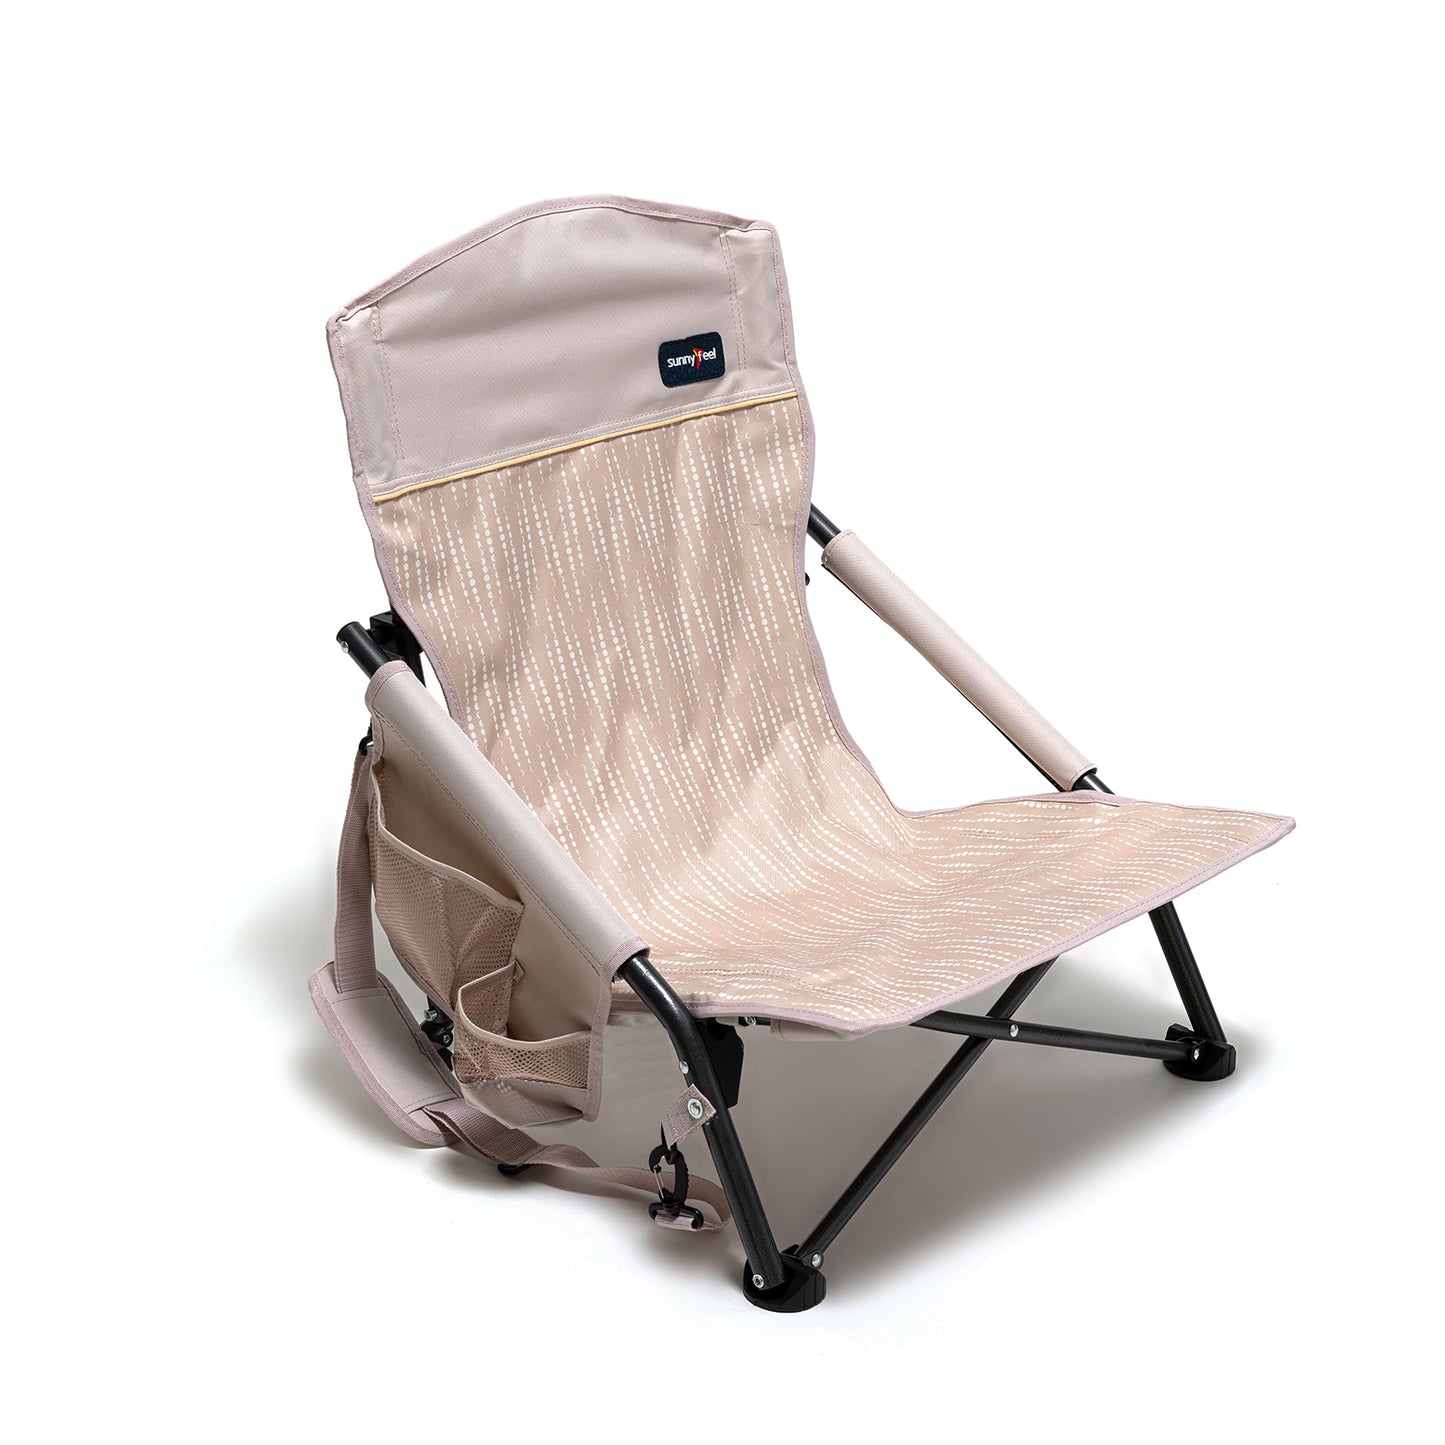 SunnyFeel AC2417G Low Camping Chair